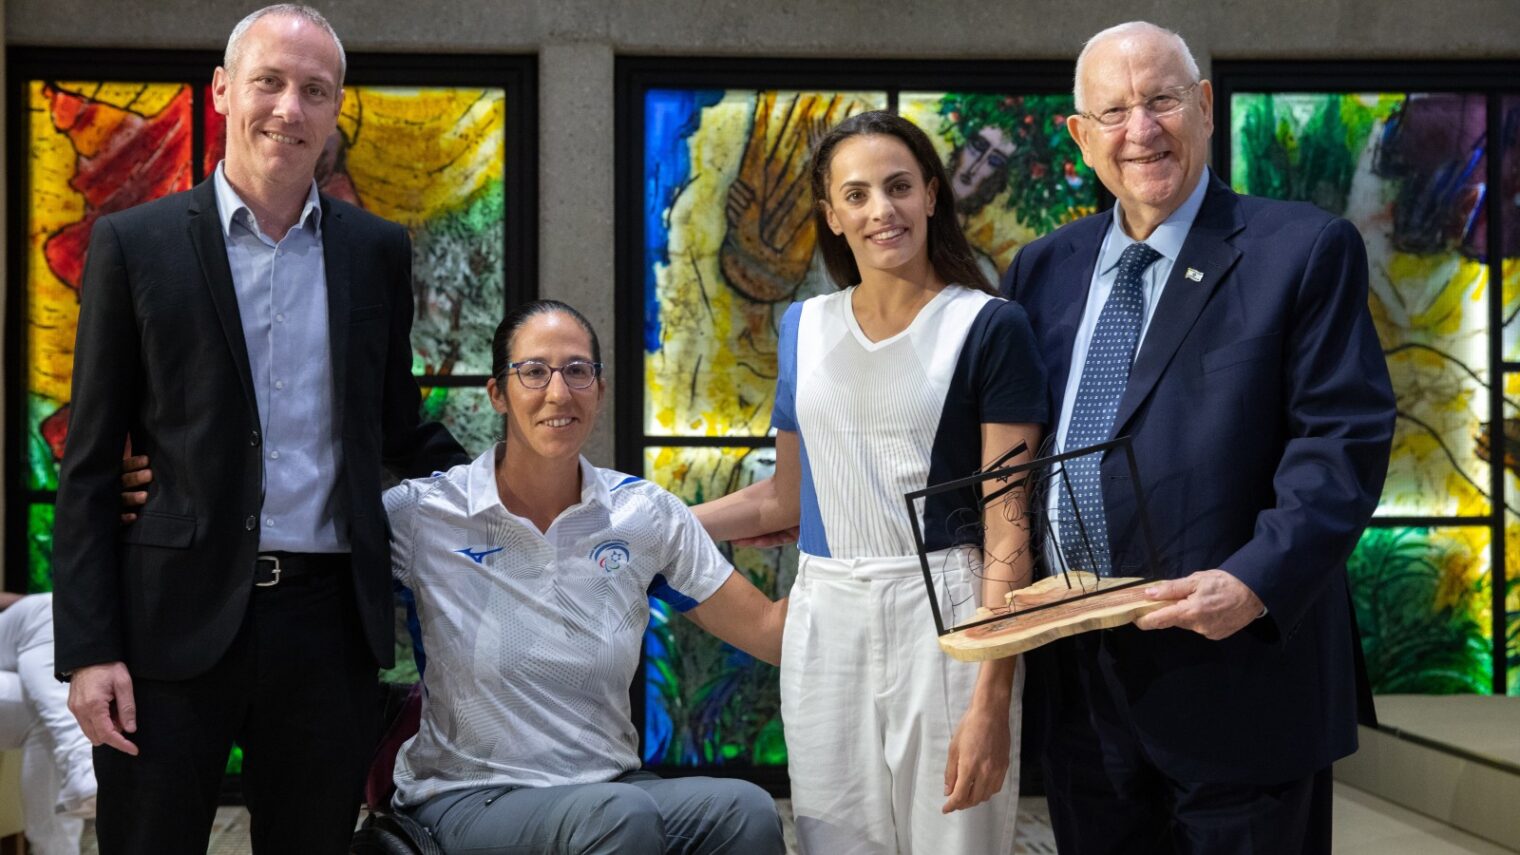 Paralympic rower Moran Samuel and Olympic rhythmic gymnast Linoy Ashram, two of Israel’s leading medal contenders for the Tokyo Games, with Minister of Culture and Sports Hili Tropper and former Israeli President Reuven Rivlin at the President's Residence in Jerusalem on June 23, 2021. Photo by Olivier Fitoussi/Flash90